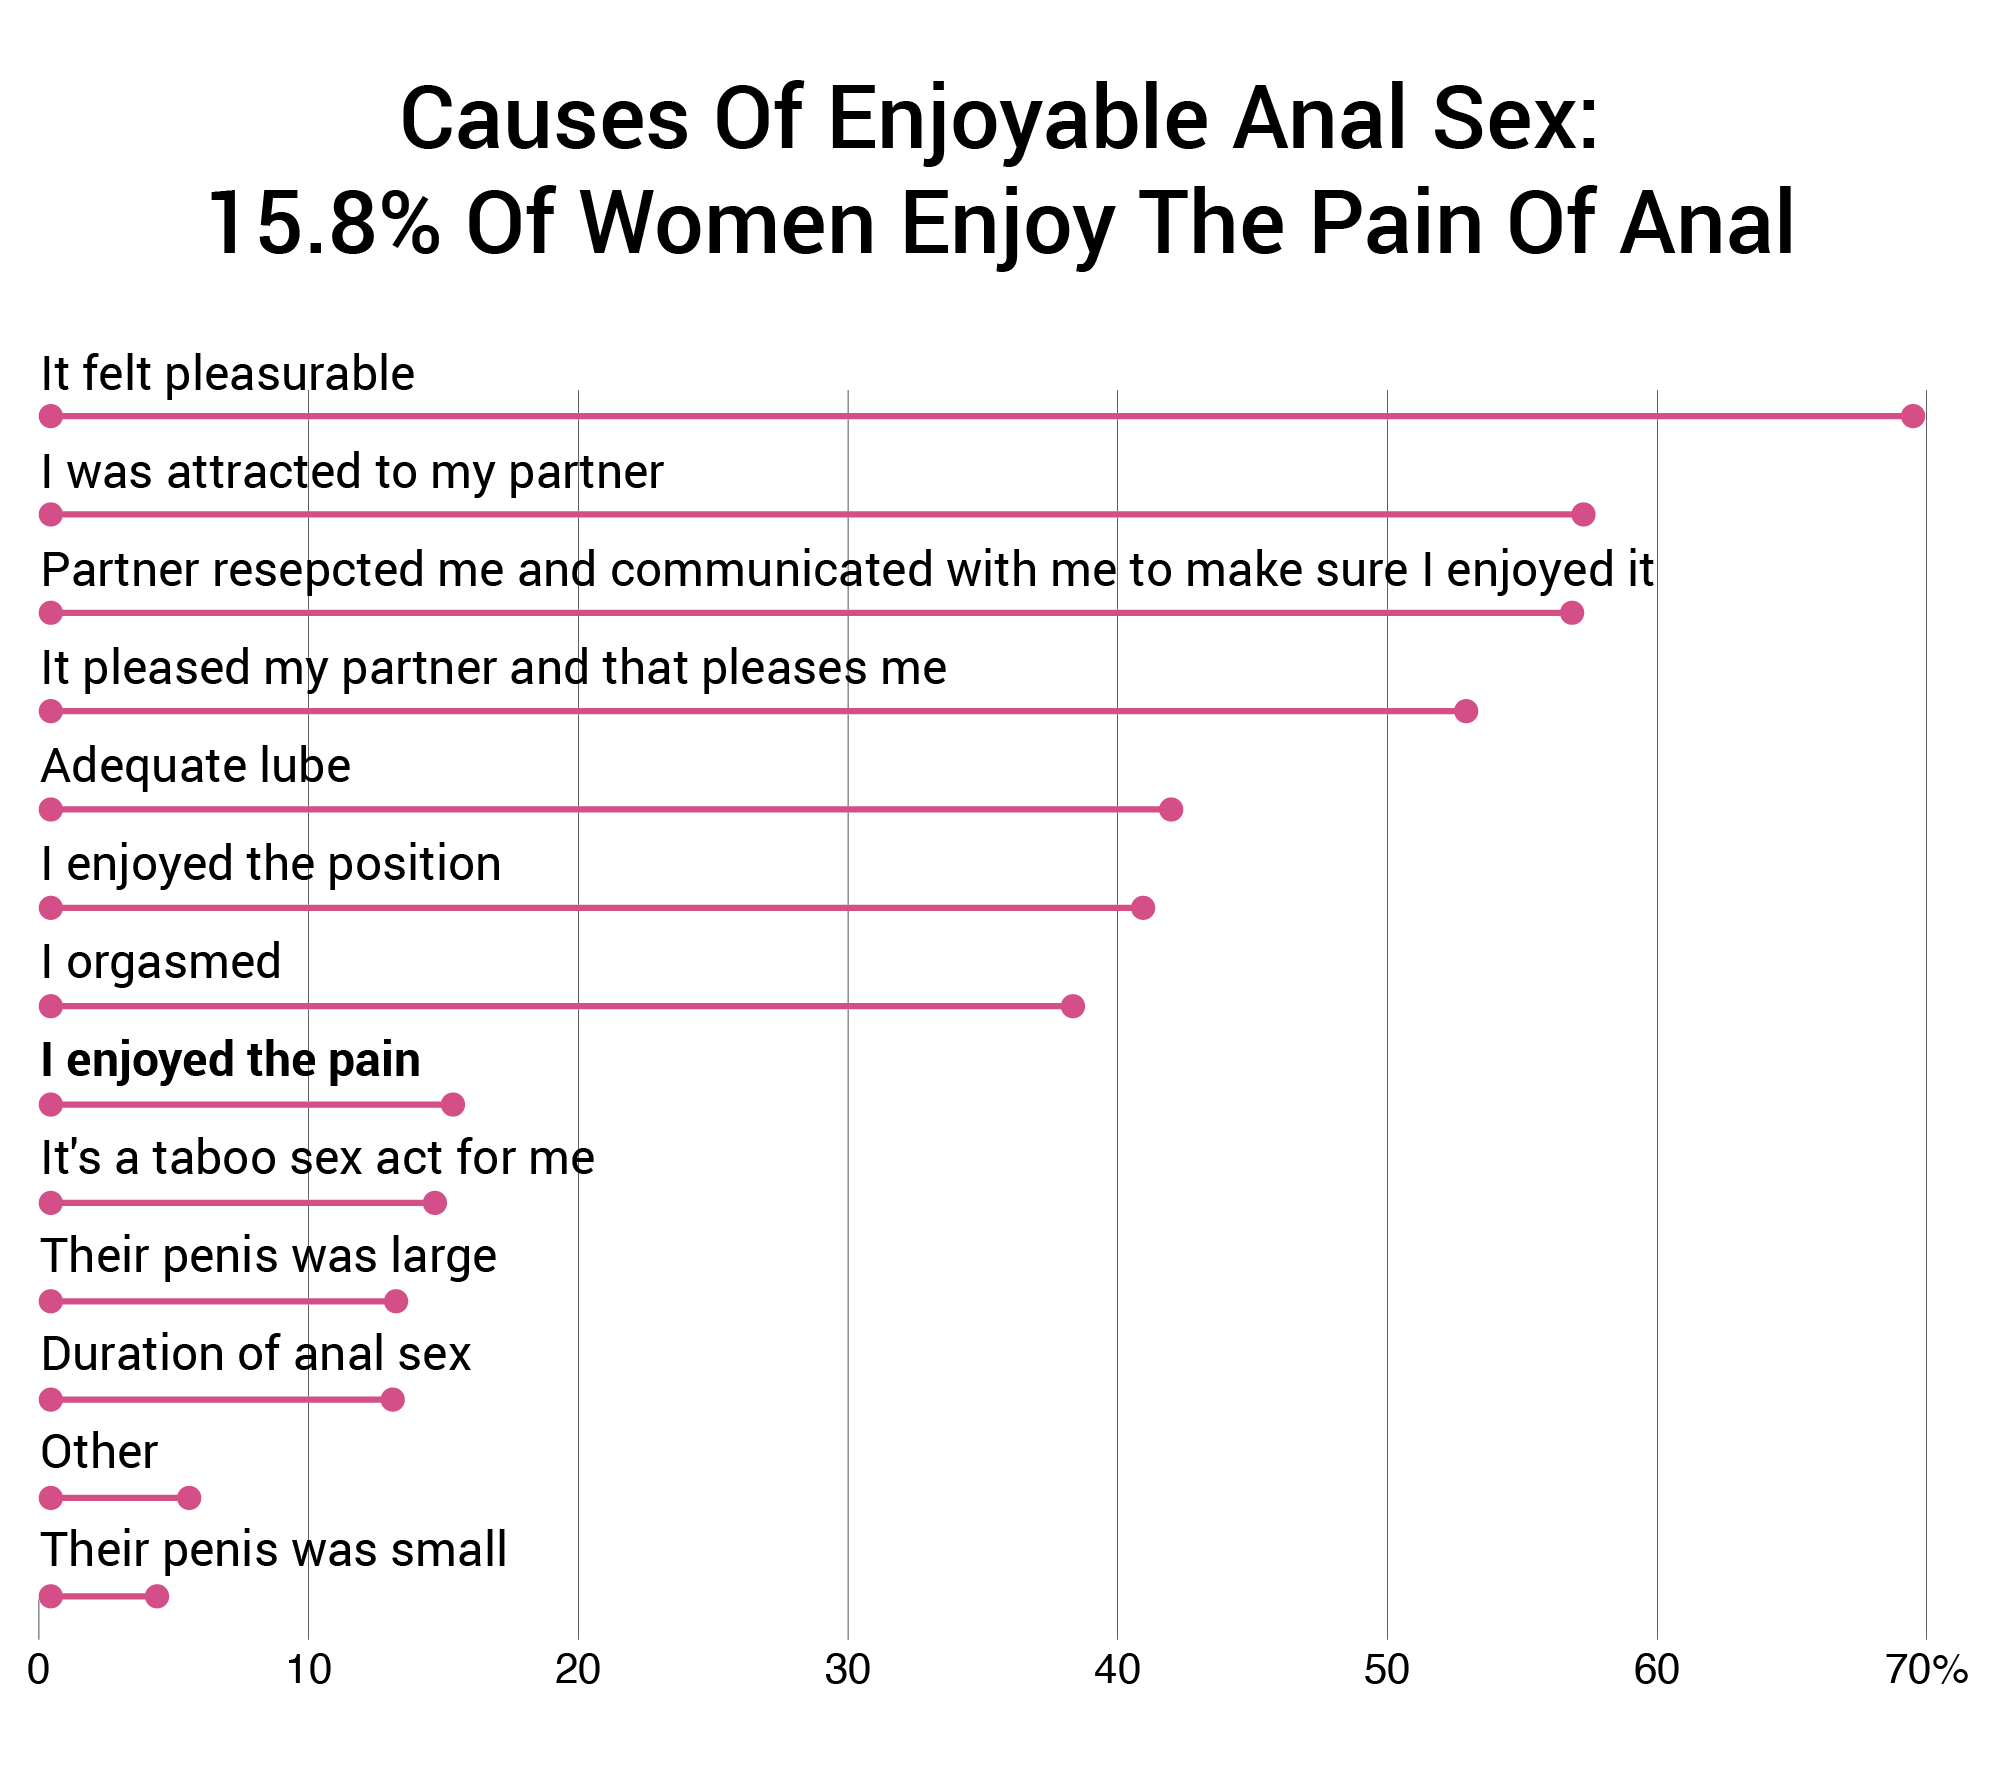 most common causes of enjoyable anal sex